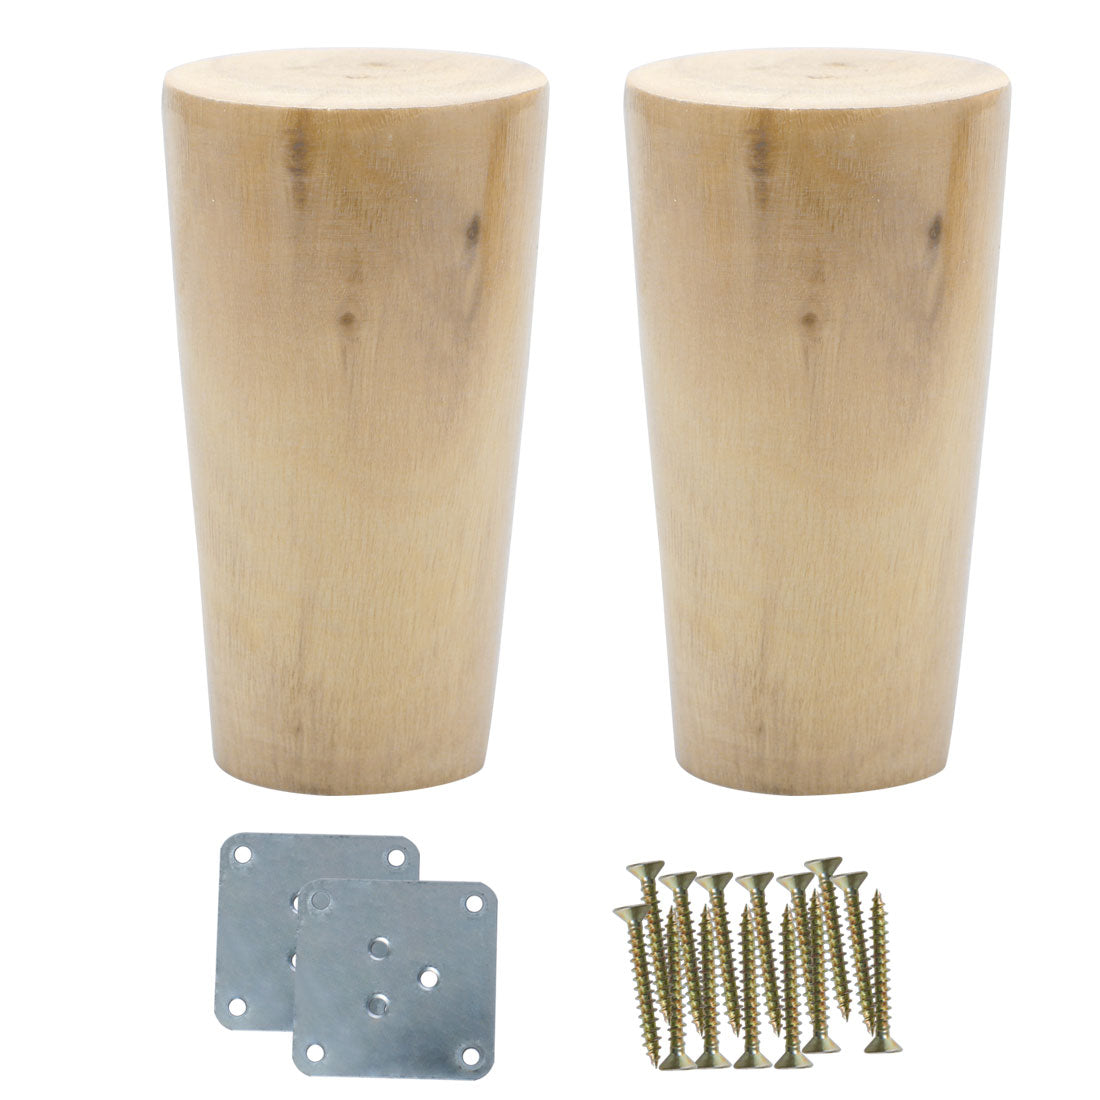 uxcell Uxcell 4" Round Solid Wood Furniture Leg Chair Sofa Cabinet Feet Replacement Set of 2